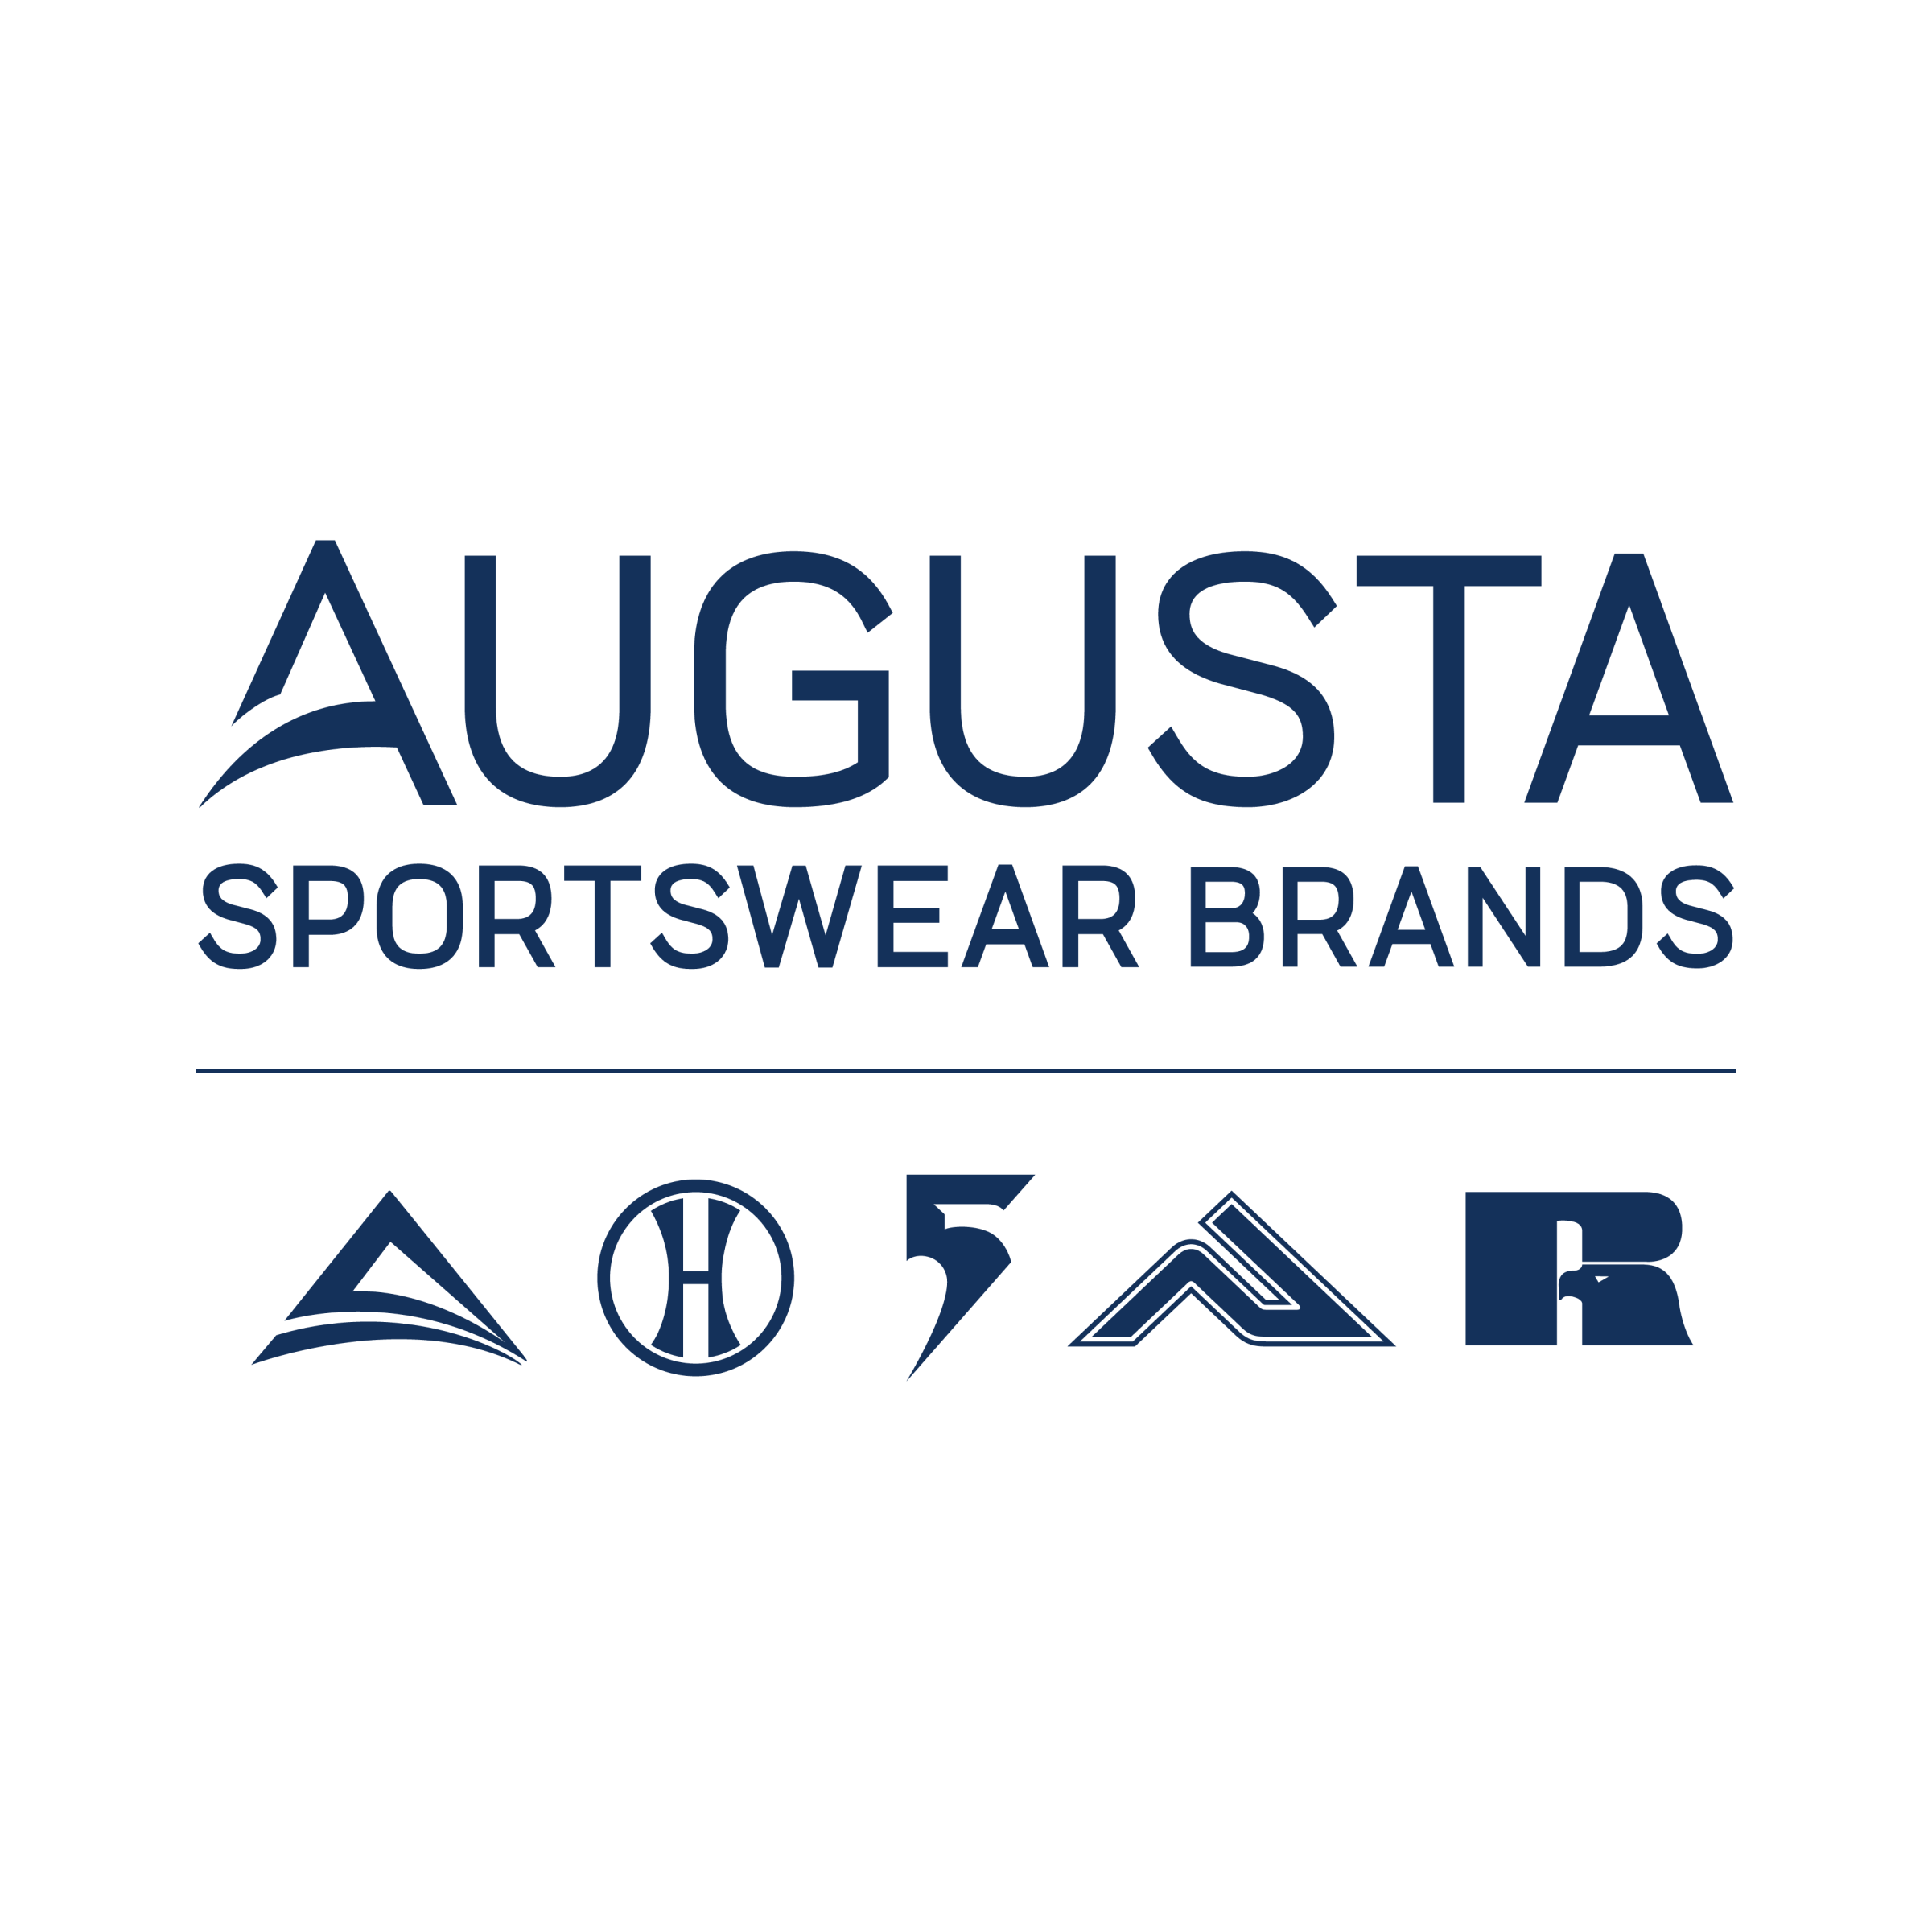 AugustaSportswearBrands_Stacked_withIcons_Navy.png